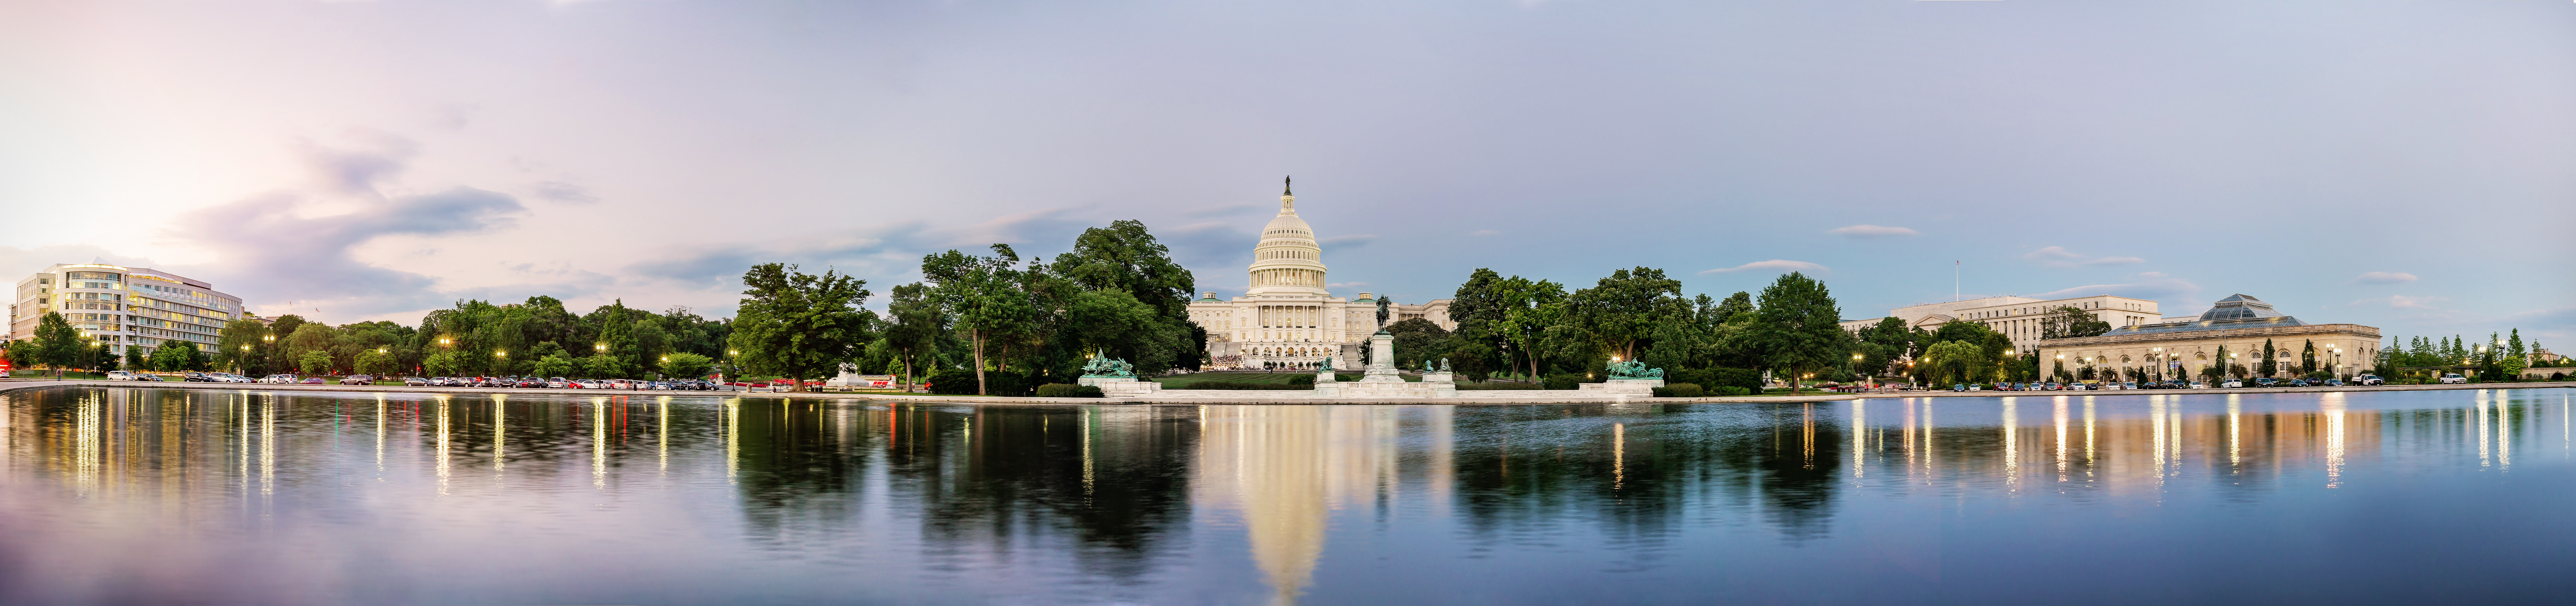 10 Bucket List Things to Do in Washington, D.C.